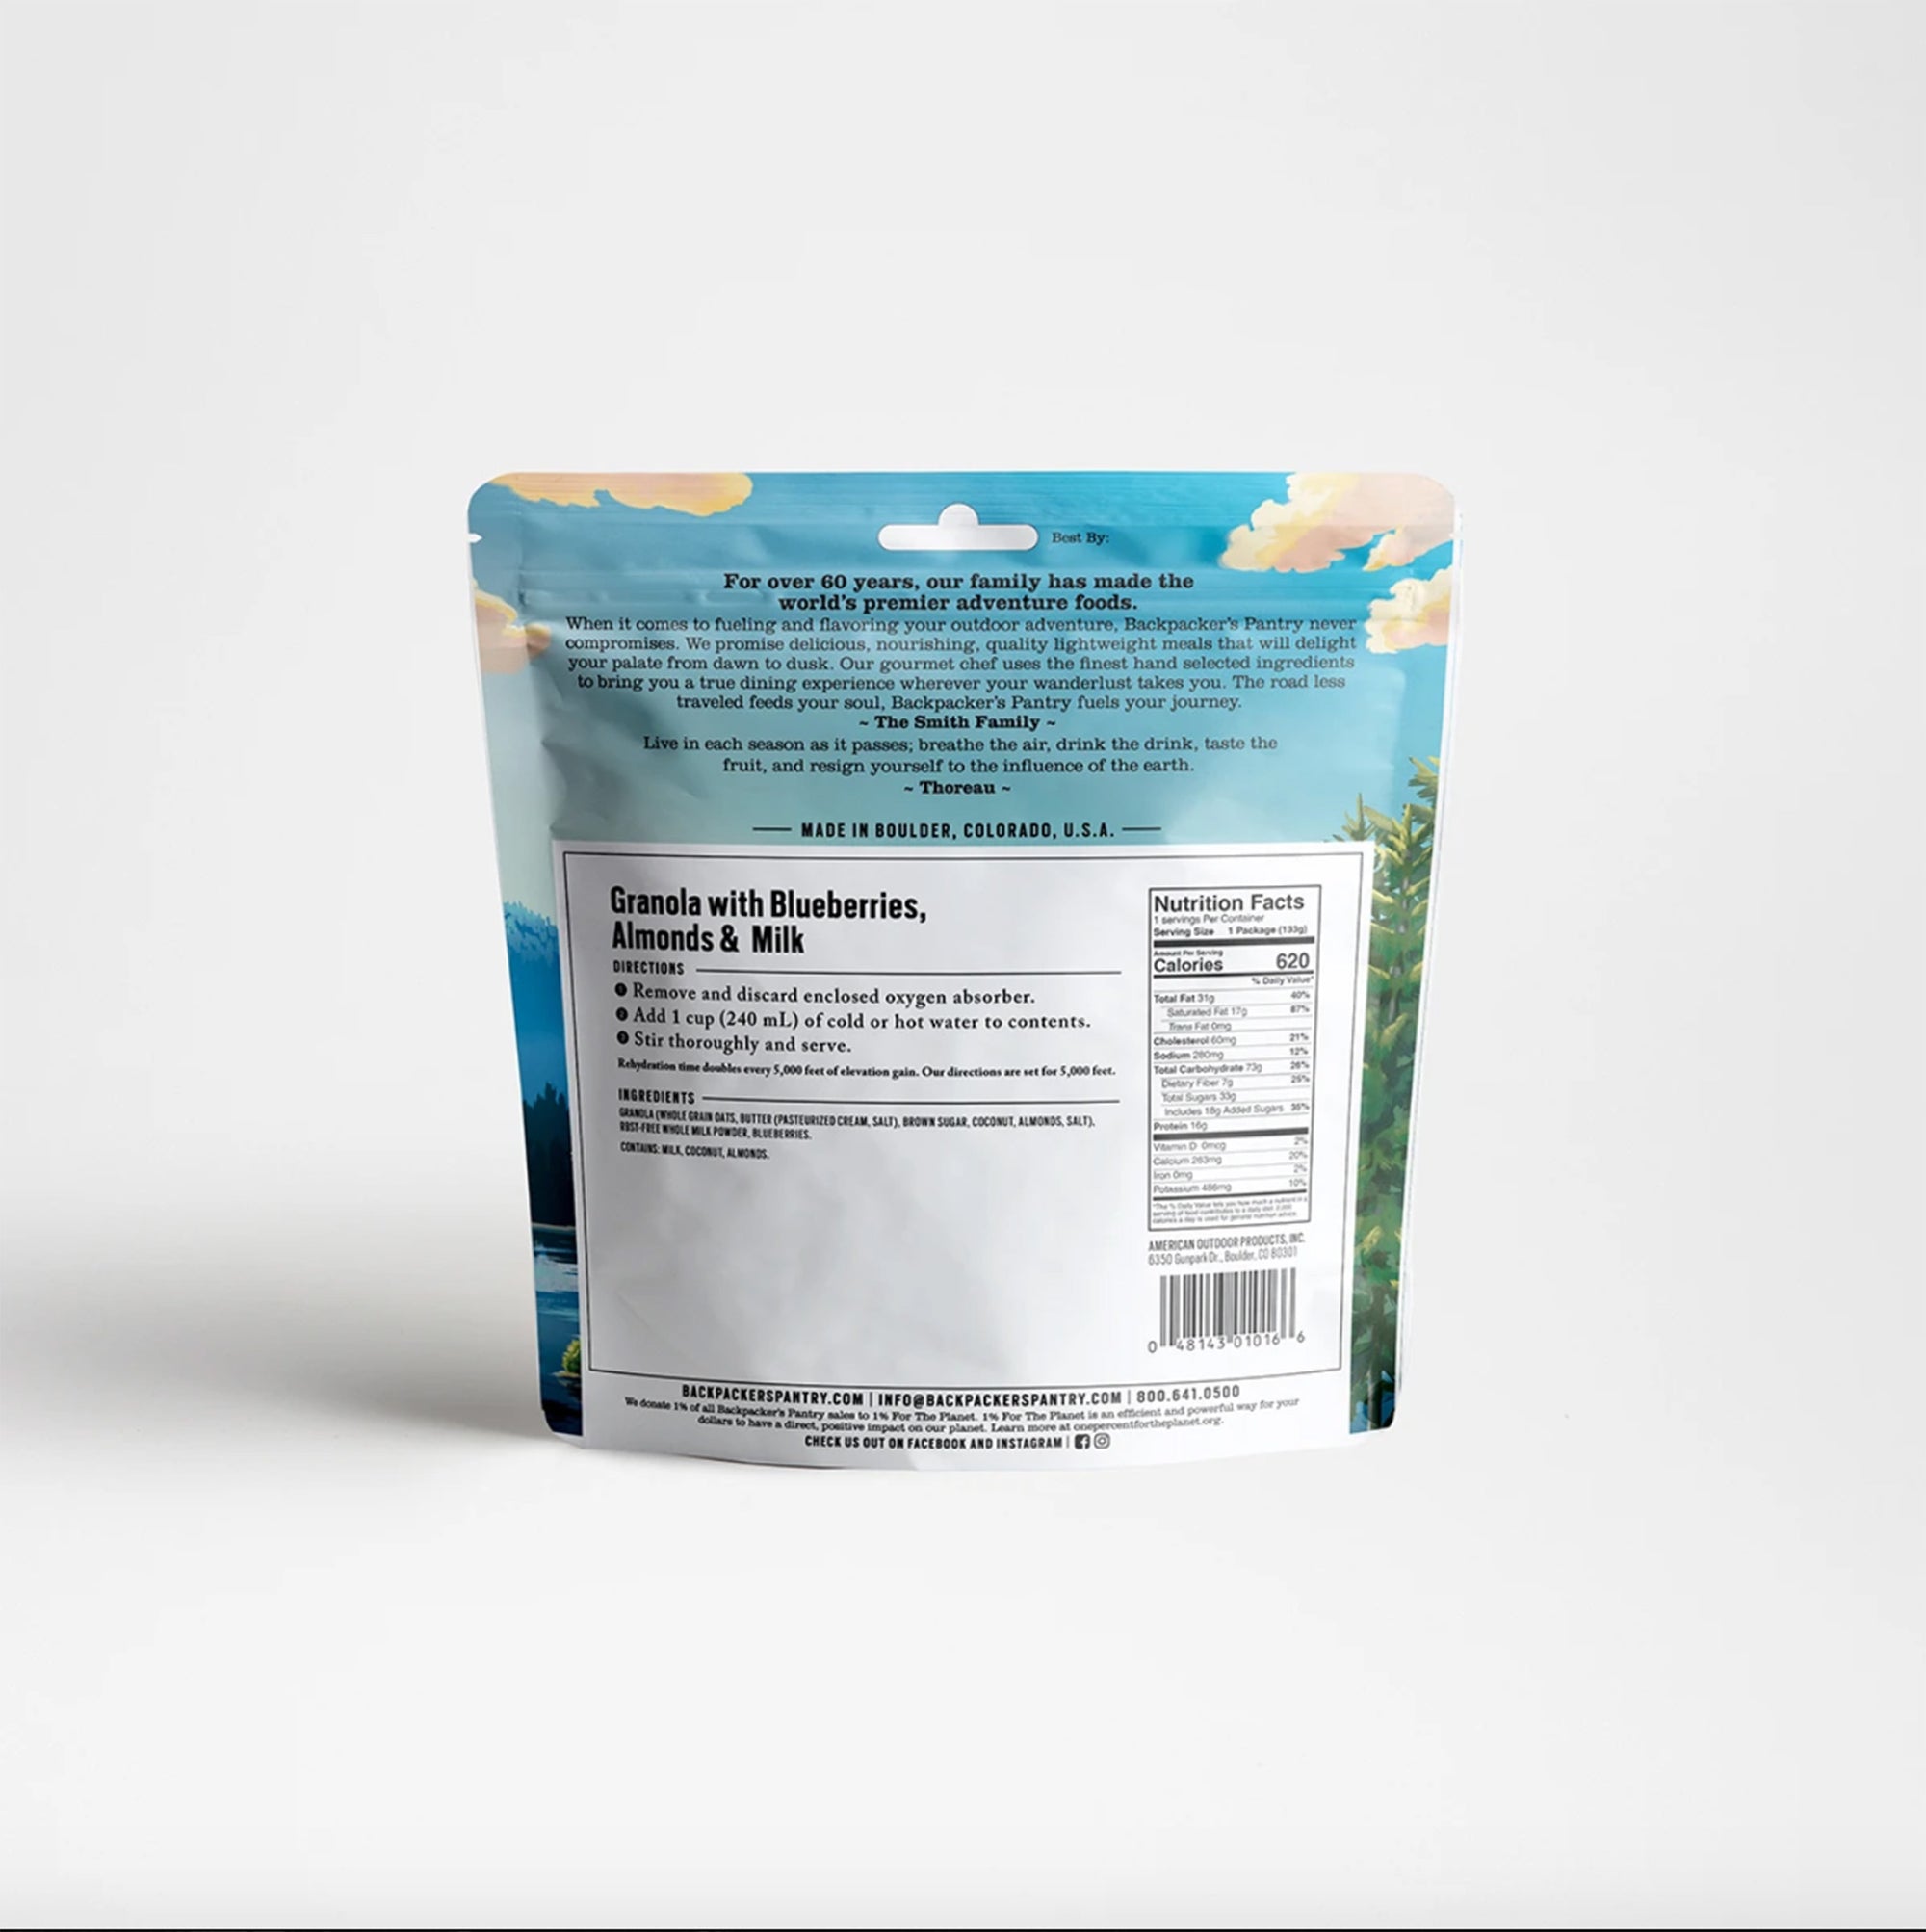 A photo of the back of the package of Backpackers Pantry Granola with Blueberries